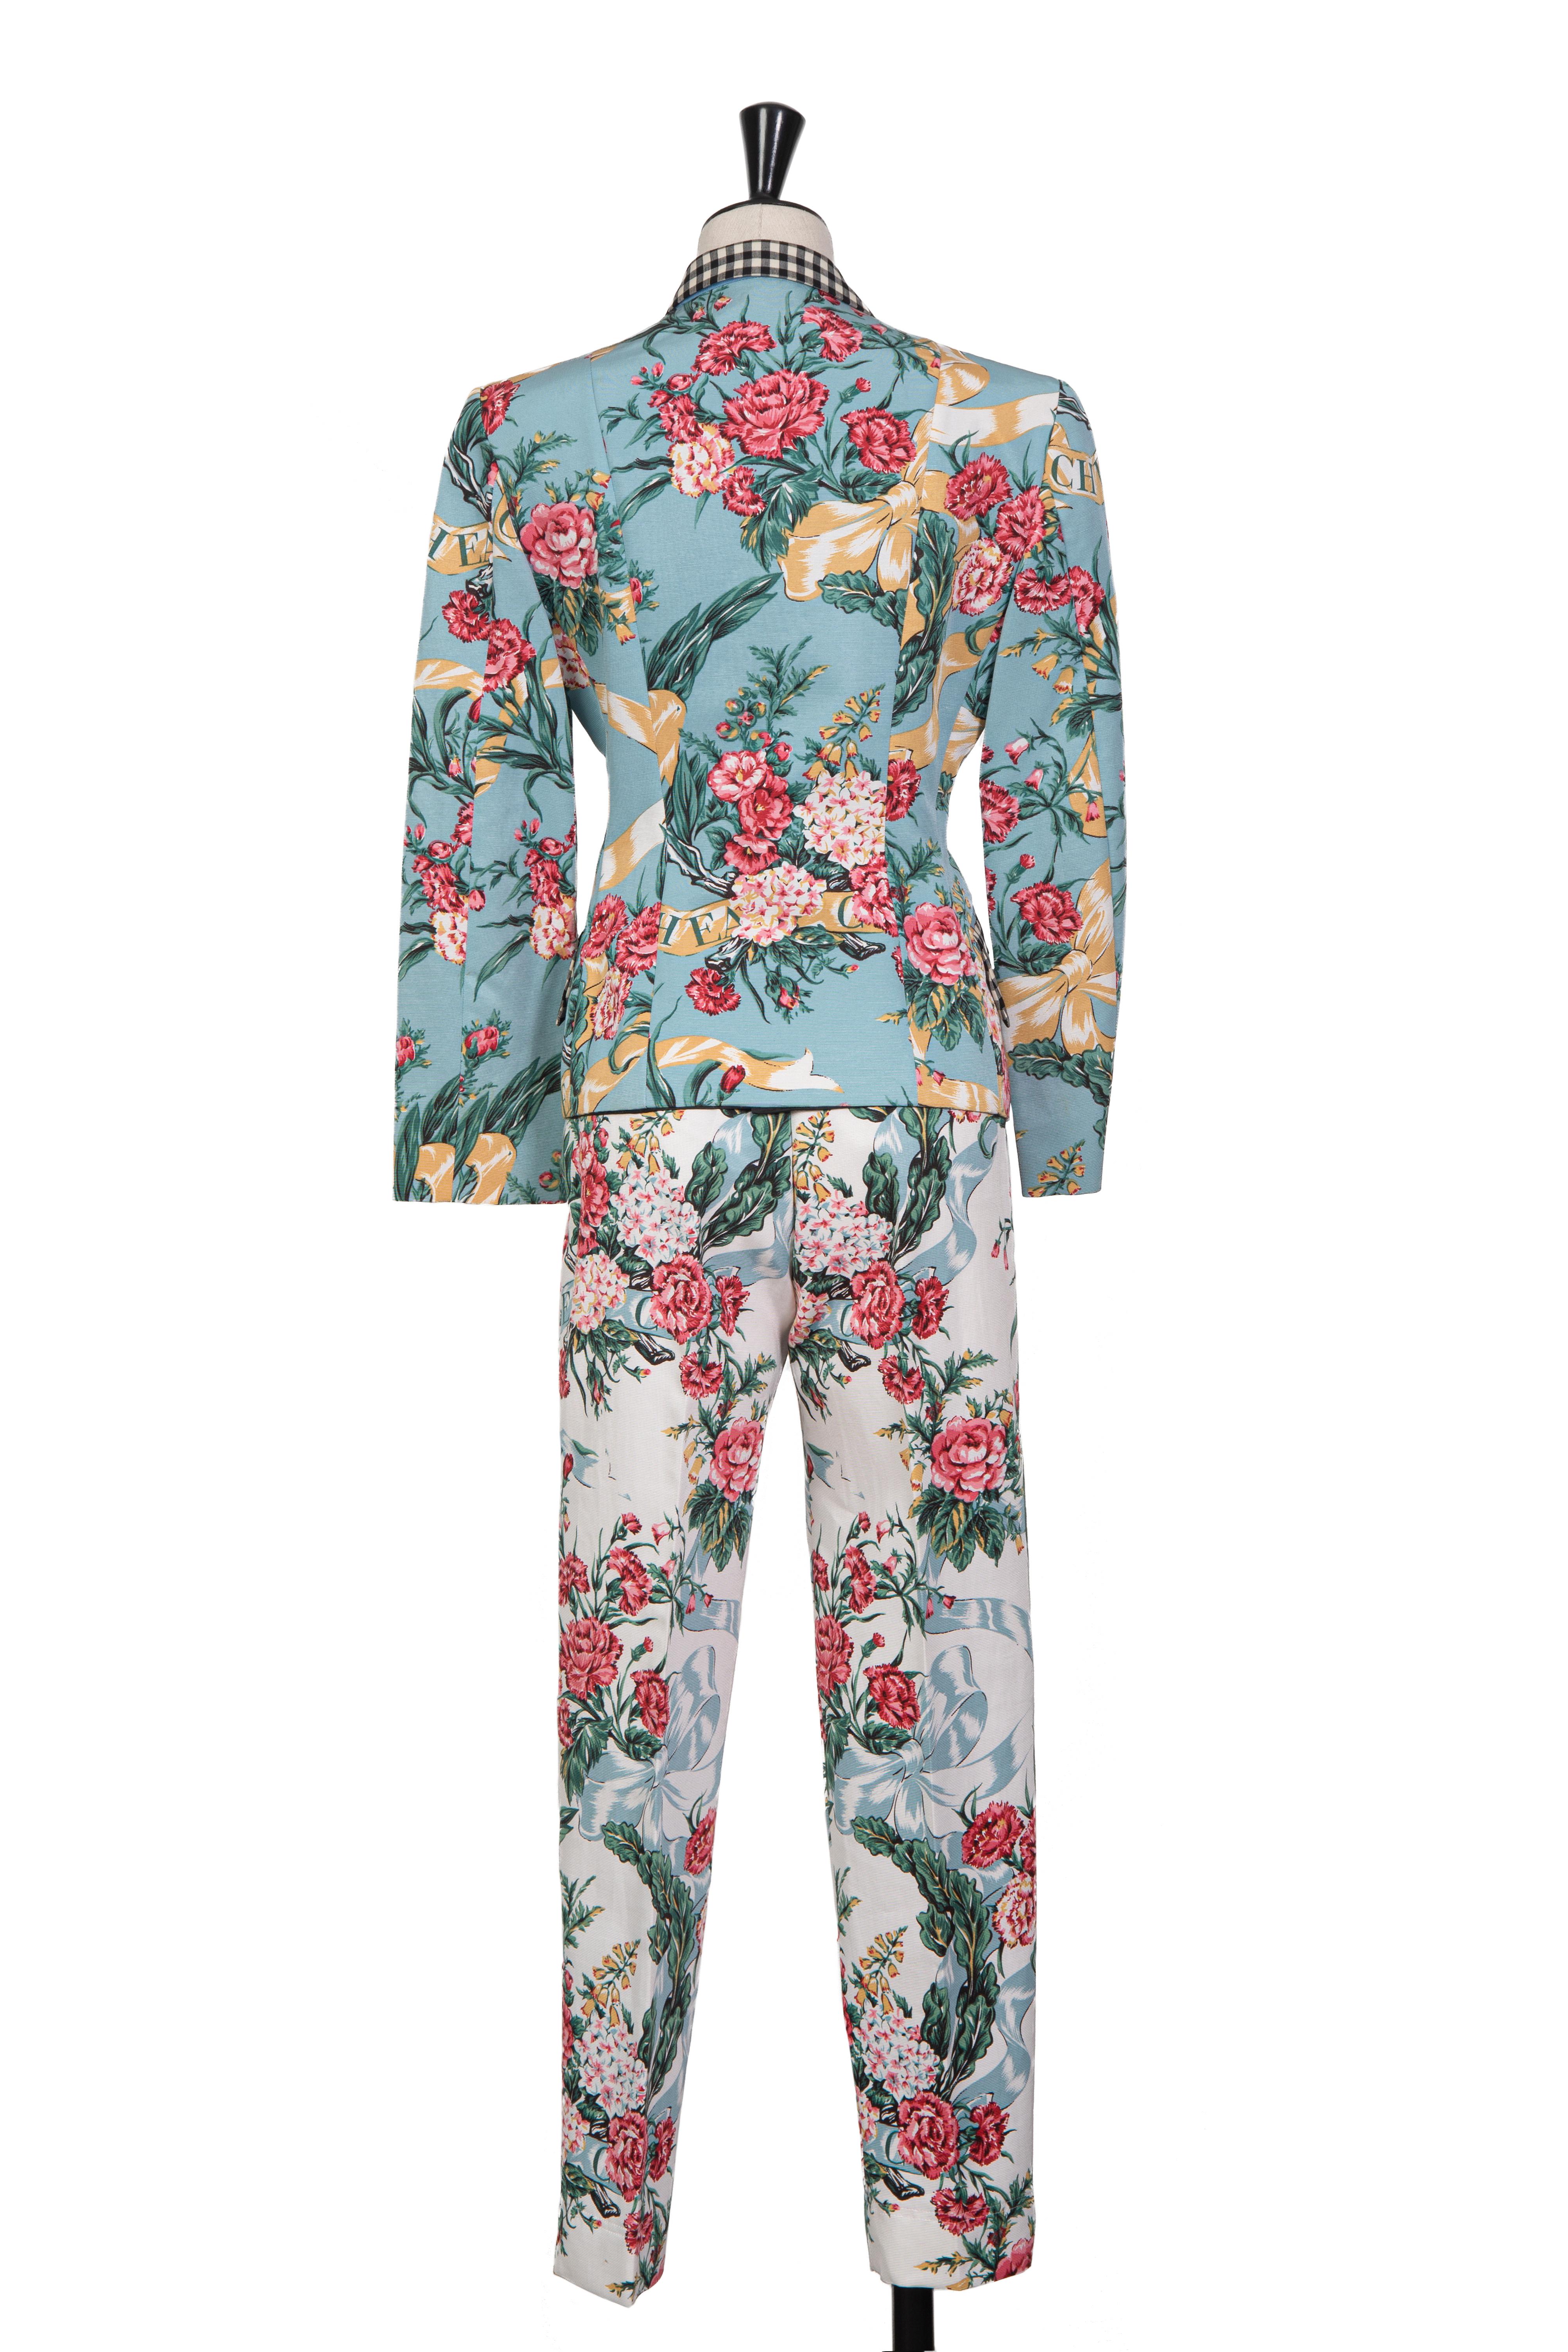 Women's Early 1990s MOSCHINO Blue White Pink Floral & Check Print Jacket & Pant Suit For Sale